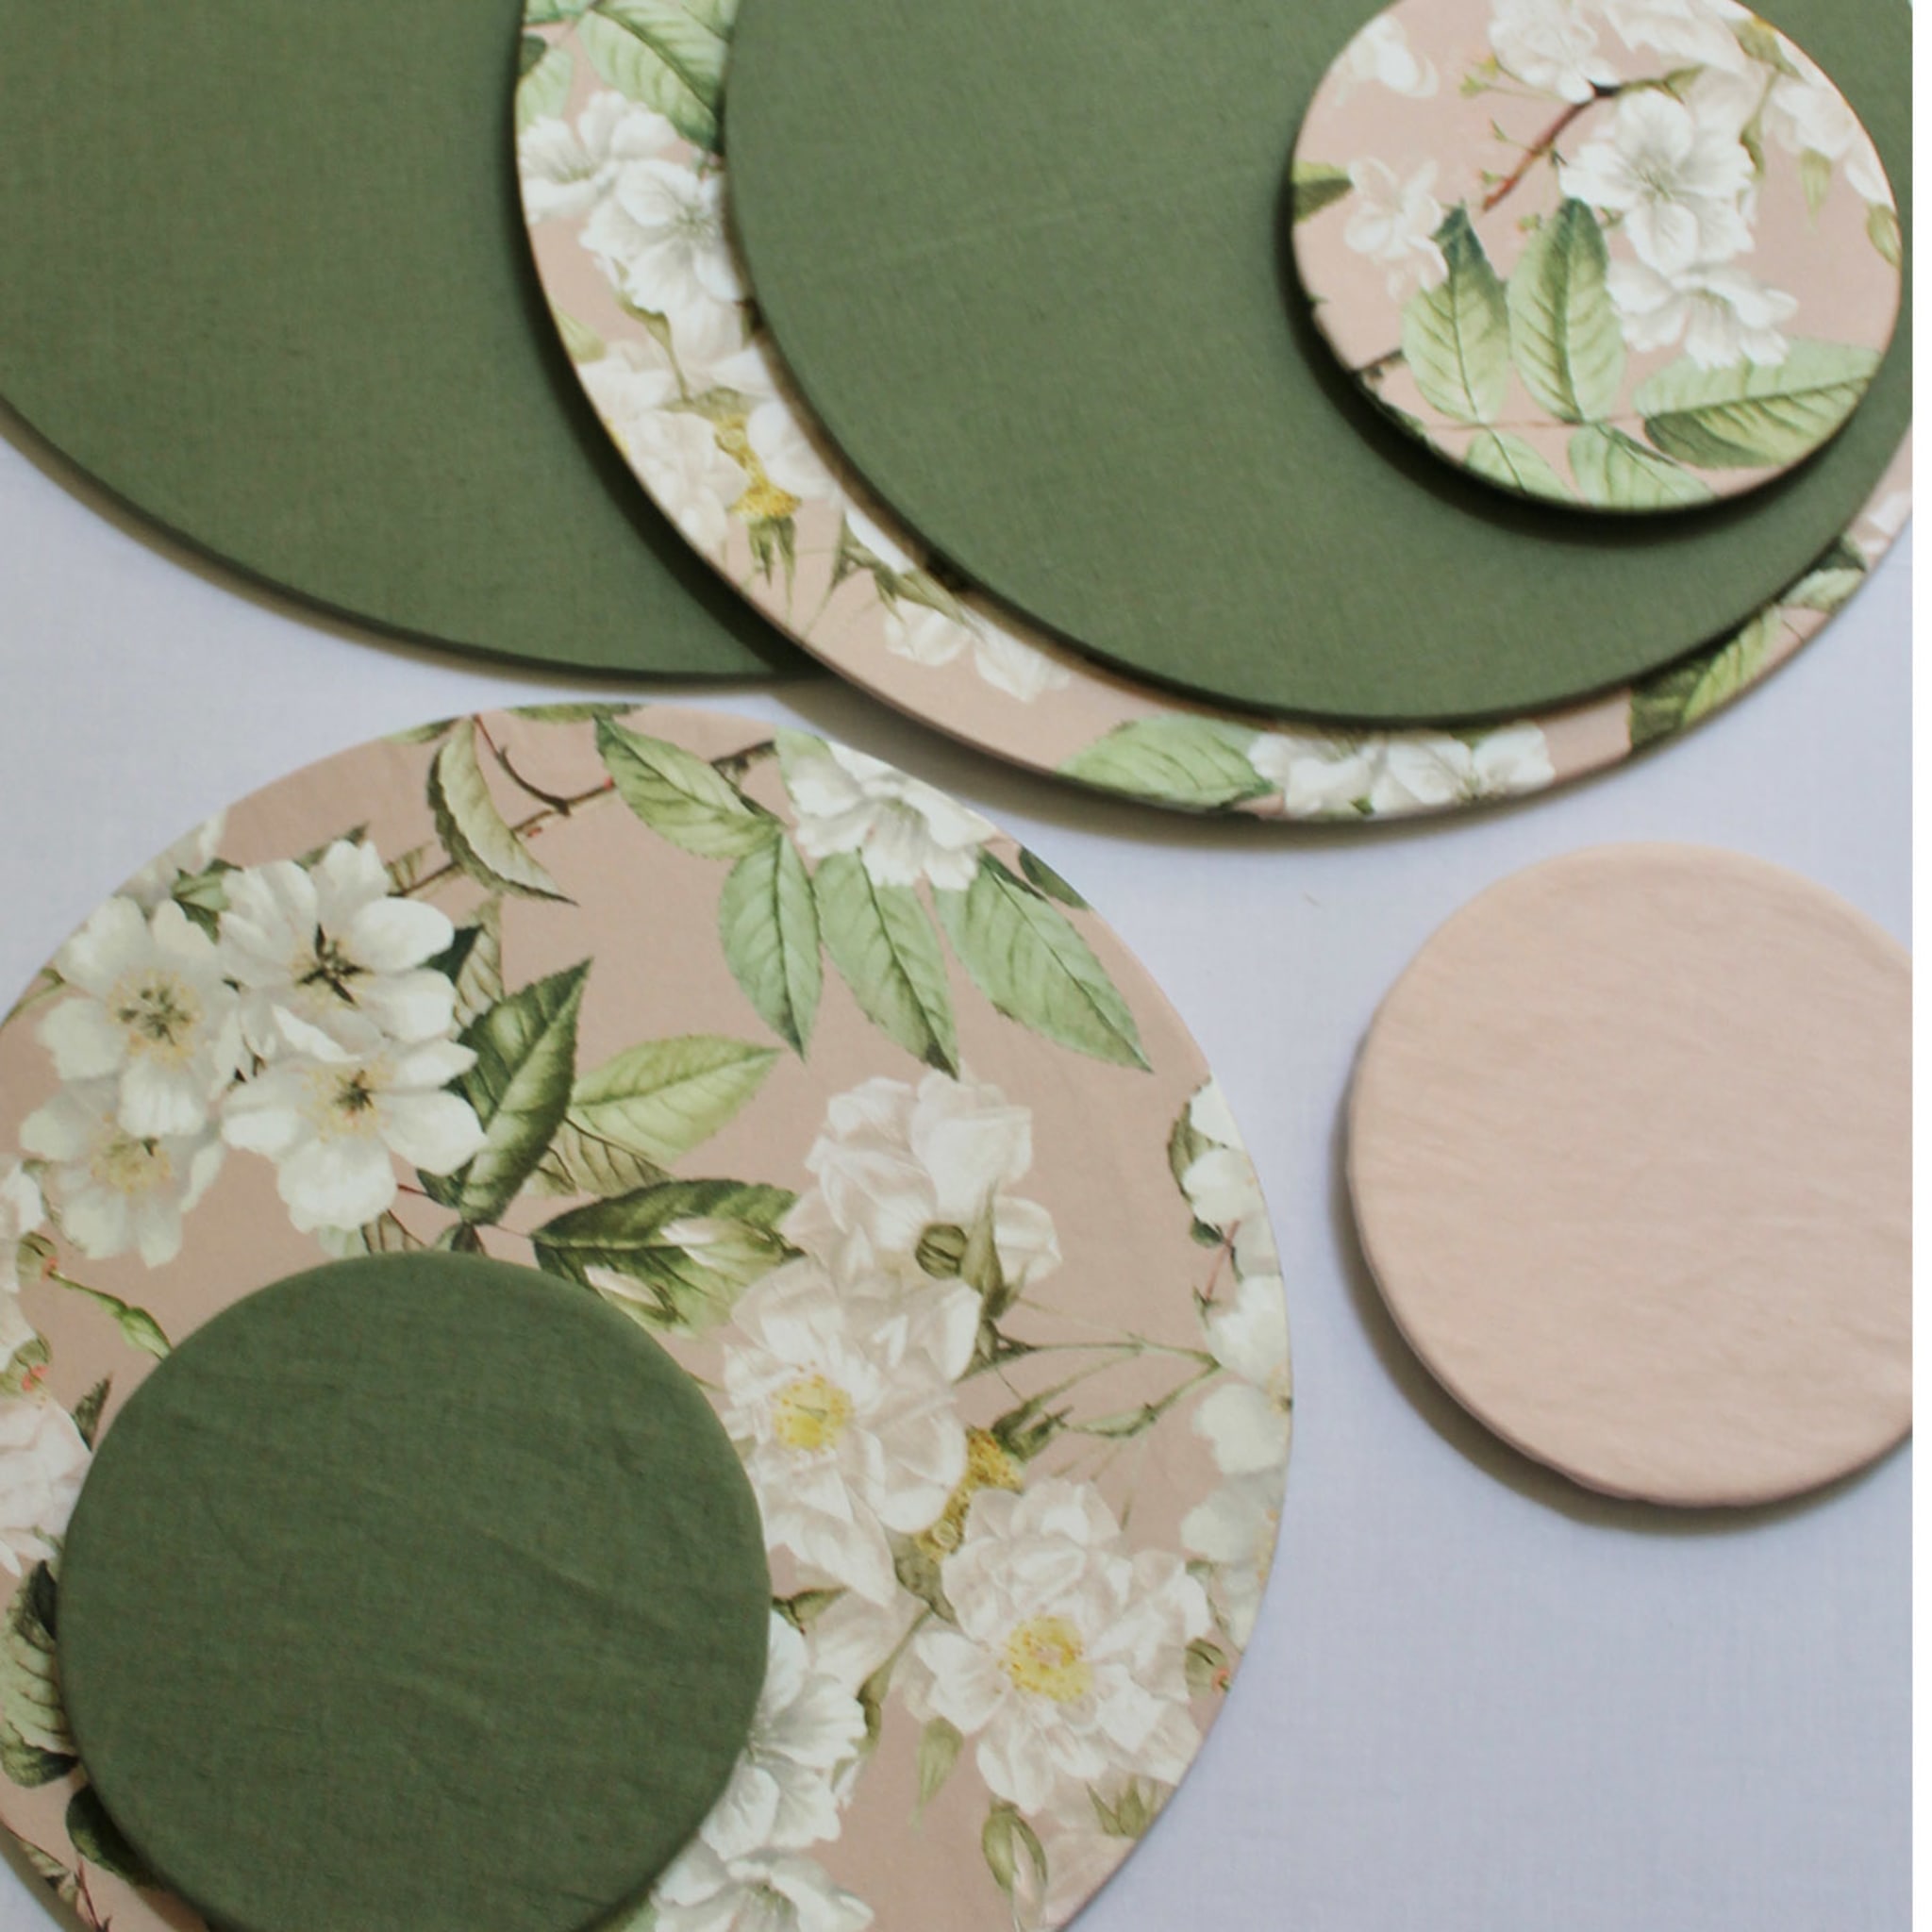 Set of 2 Cuffiette White Flowers Extra-Small Round Placemats - Alternative view 1